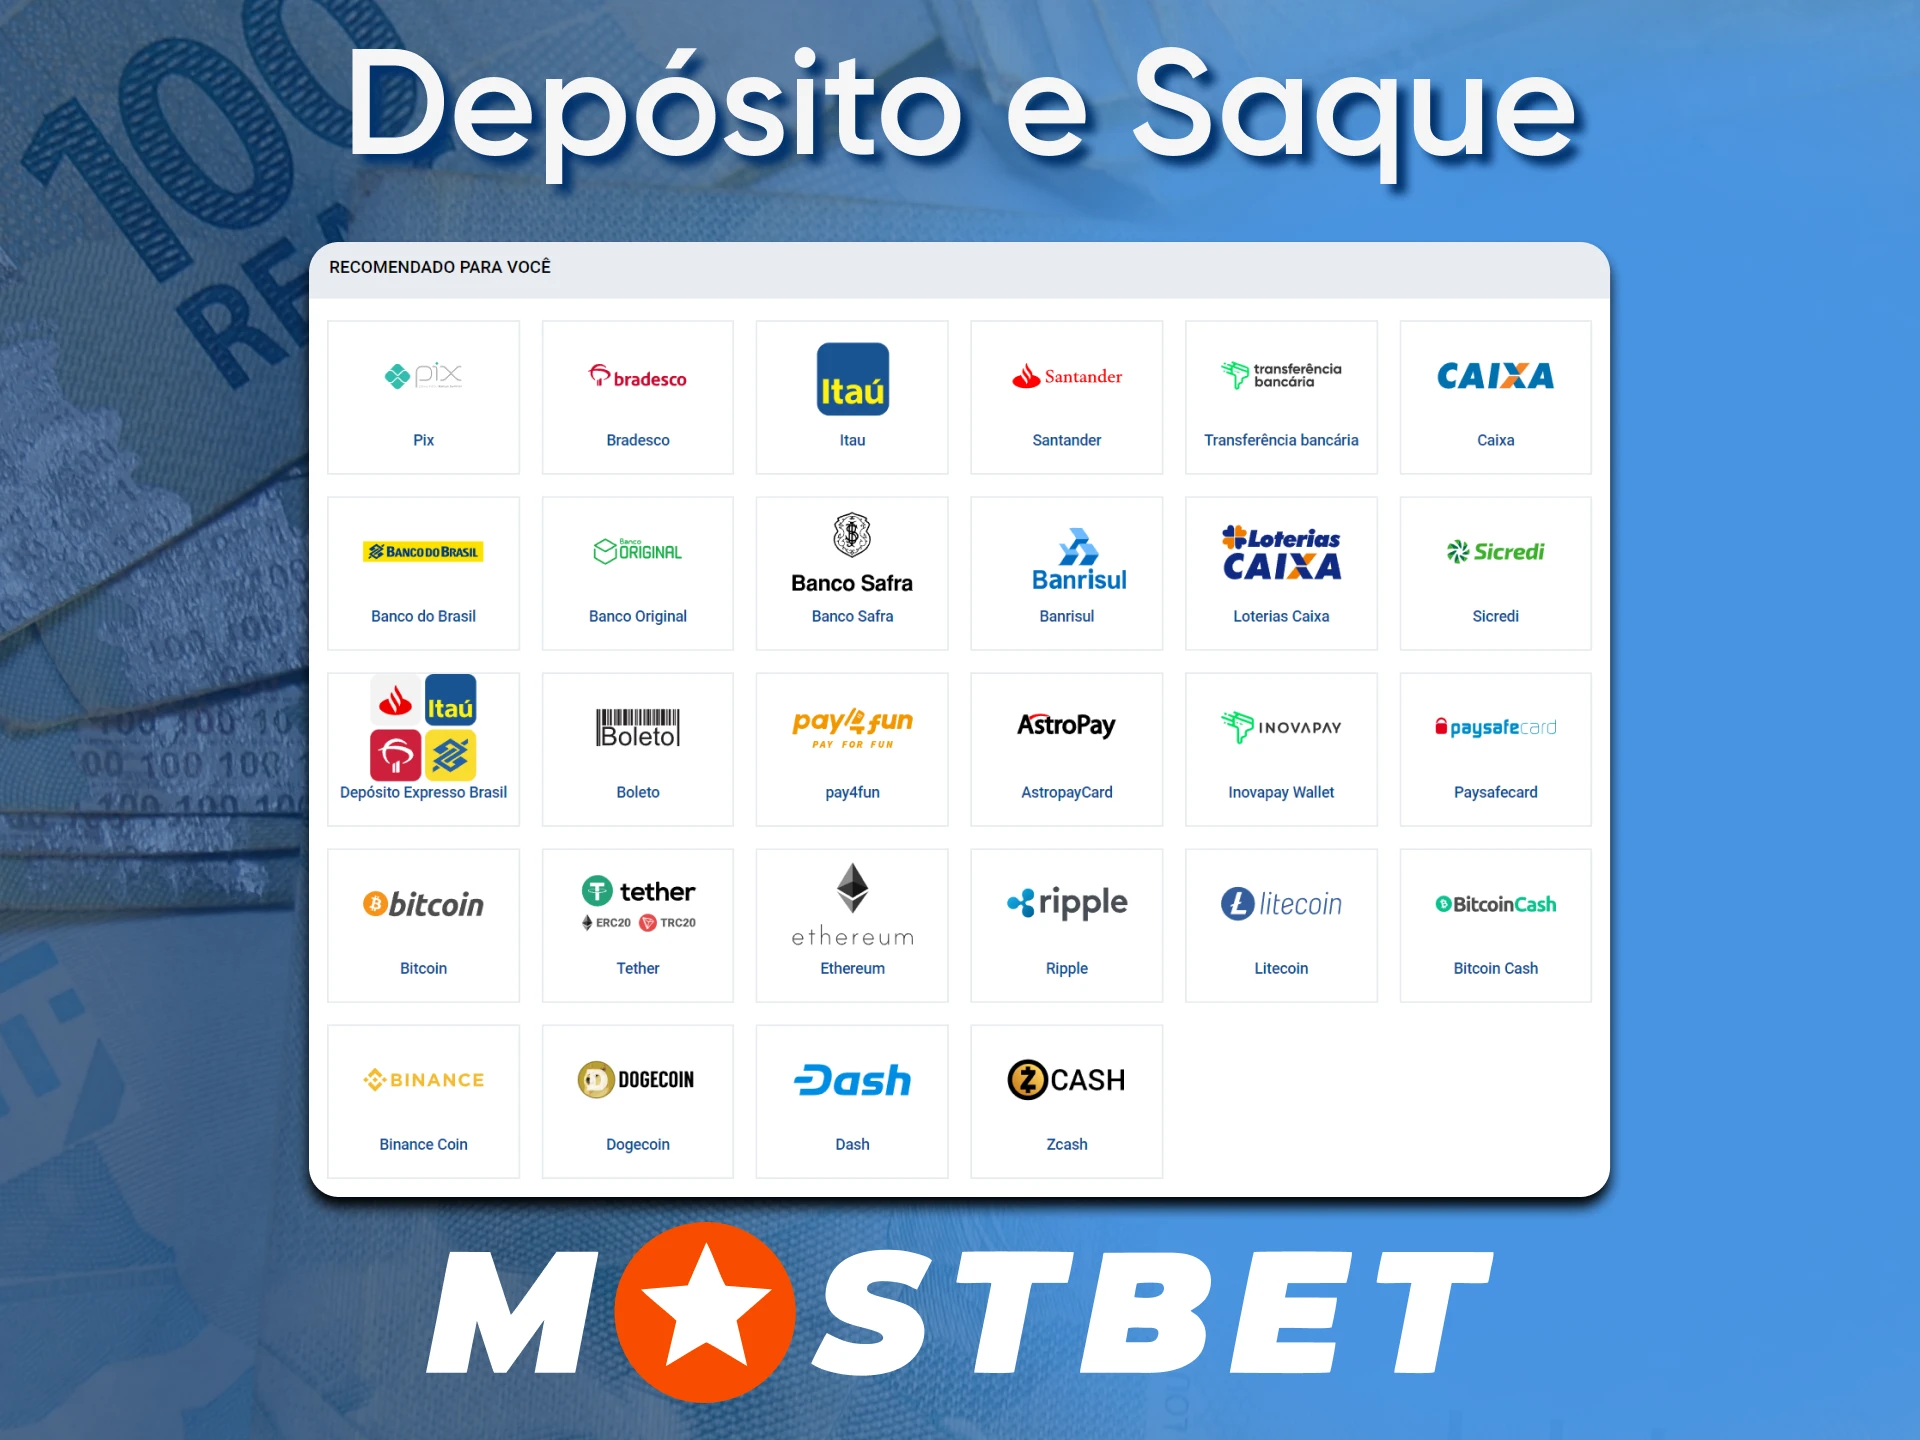 Mostbet supports popular deposit and withdrawal methods.